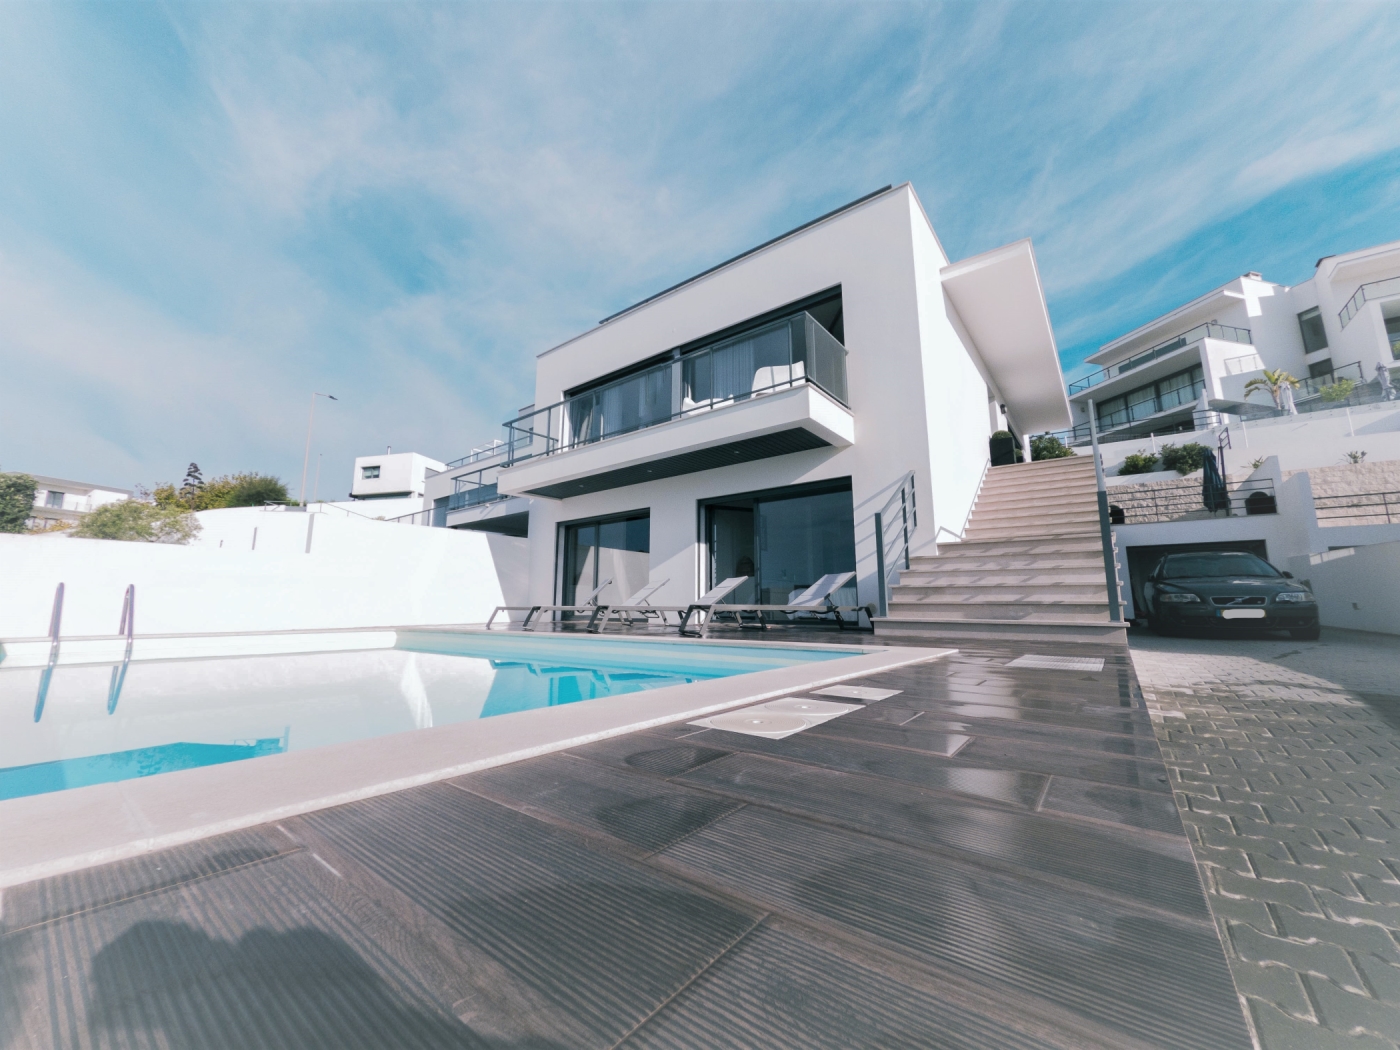 Luxurious 4-Bedroom Villa with seaview| 6 Beds, 3.5 Baths in Lourinhã